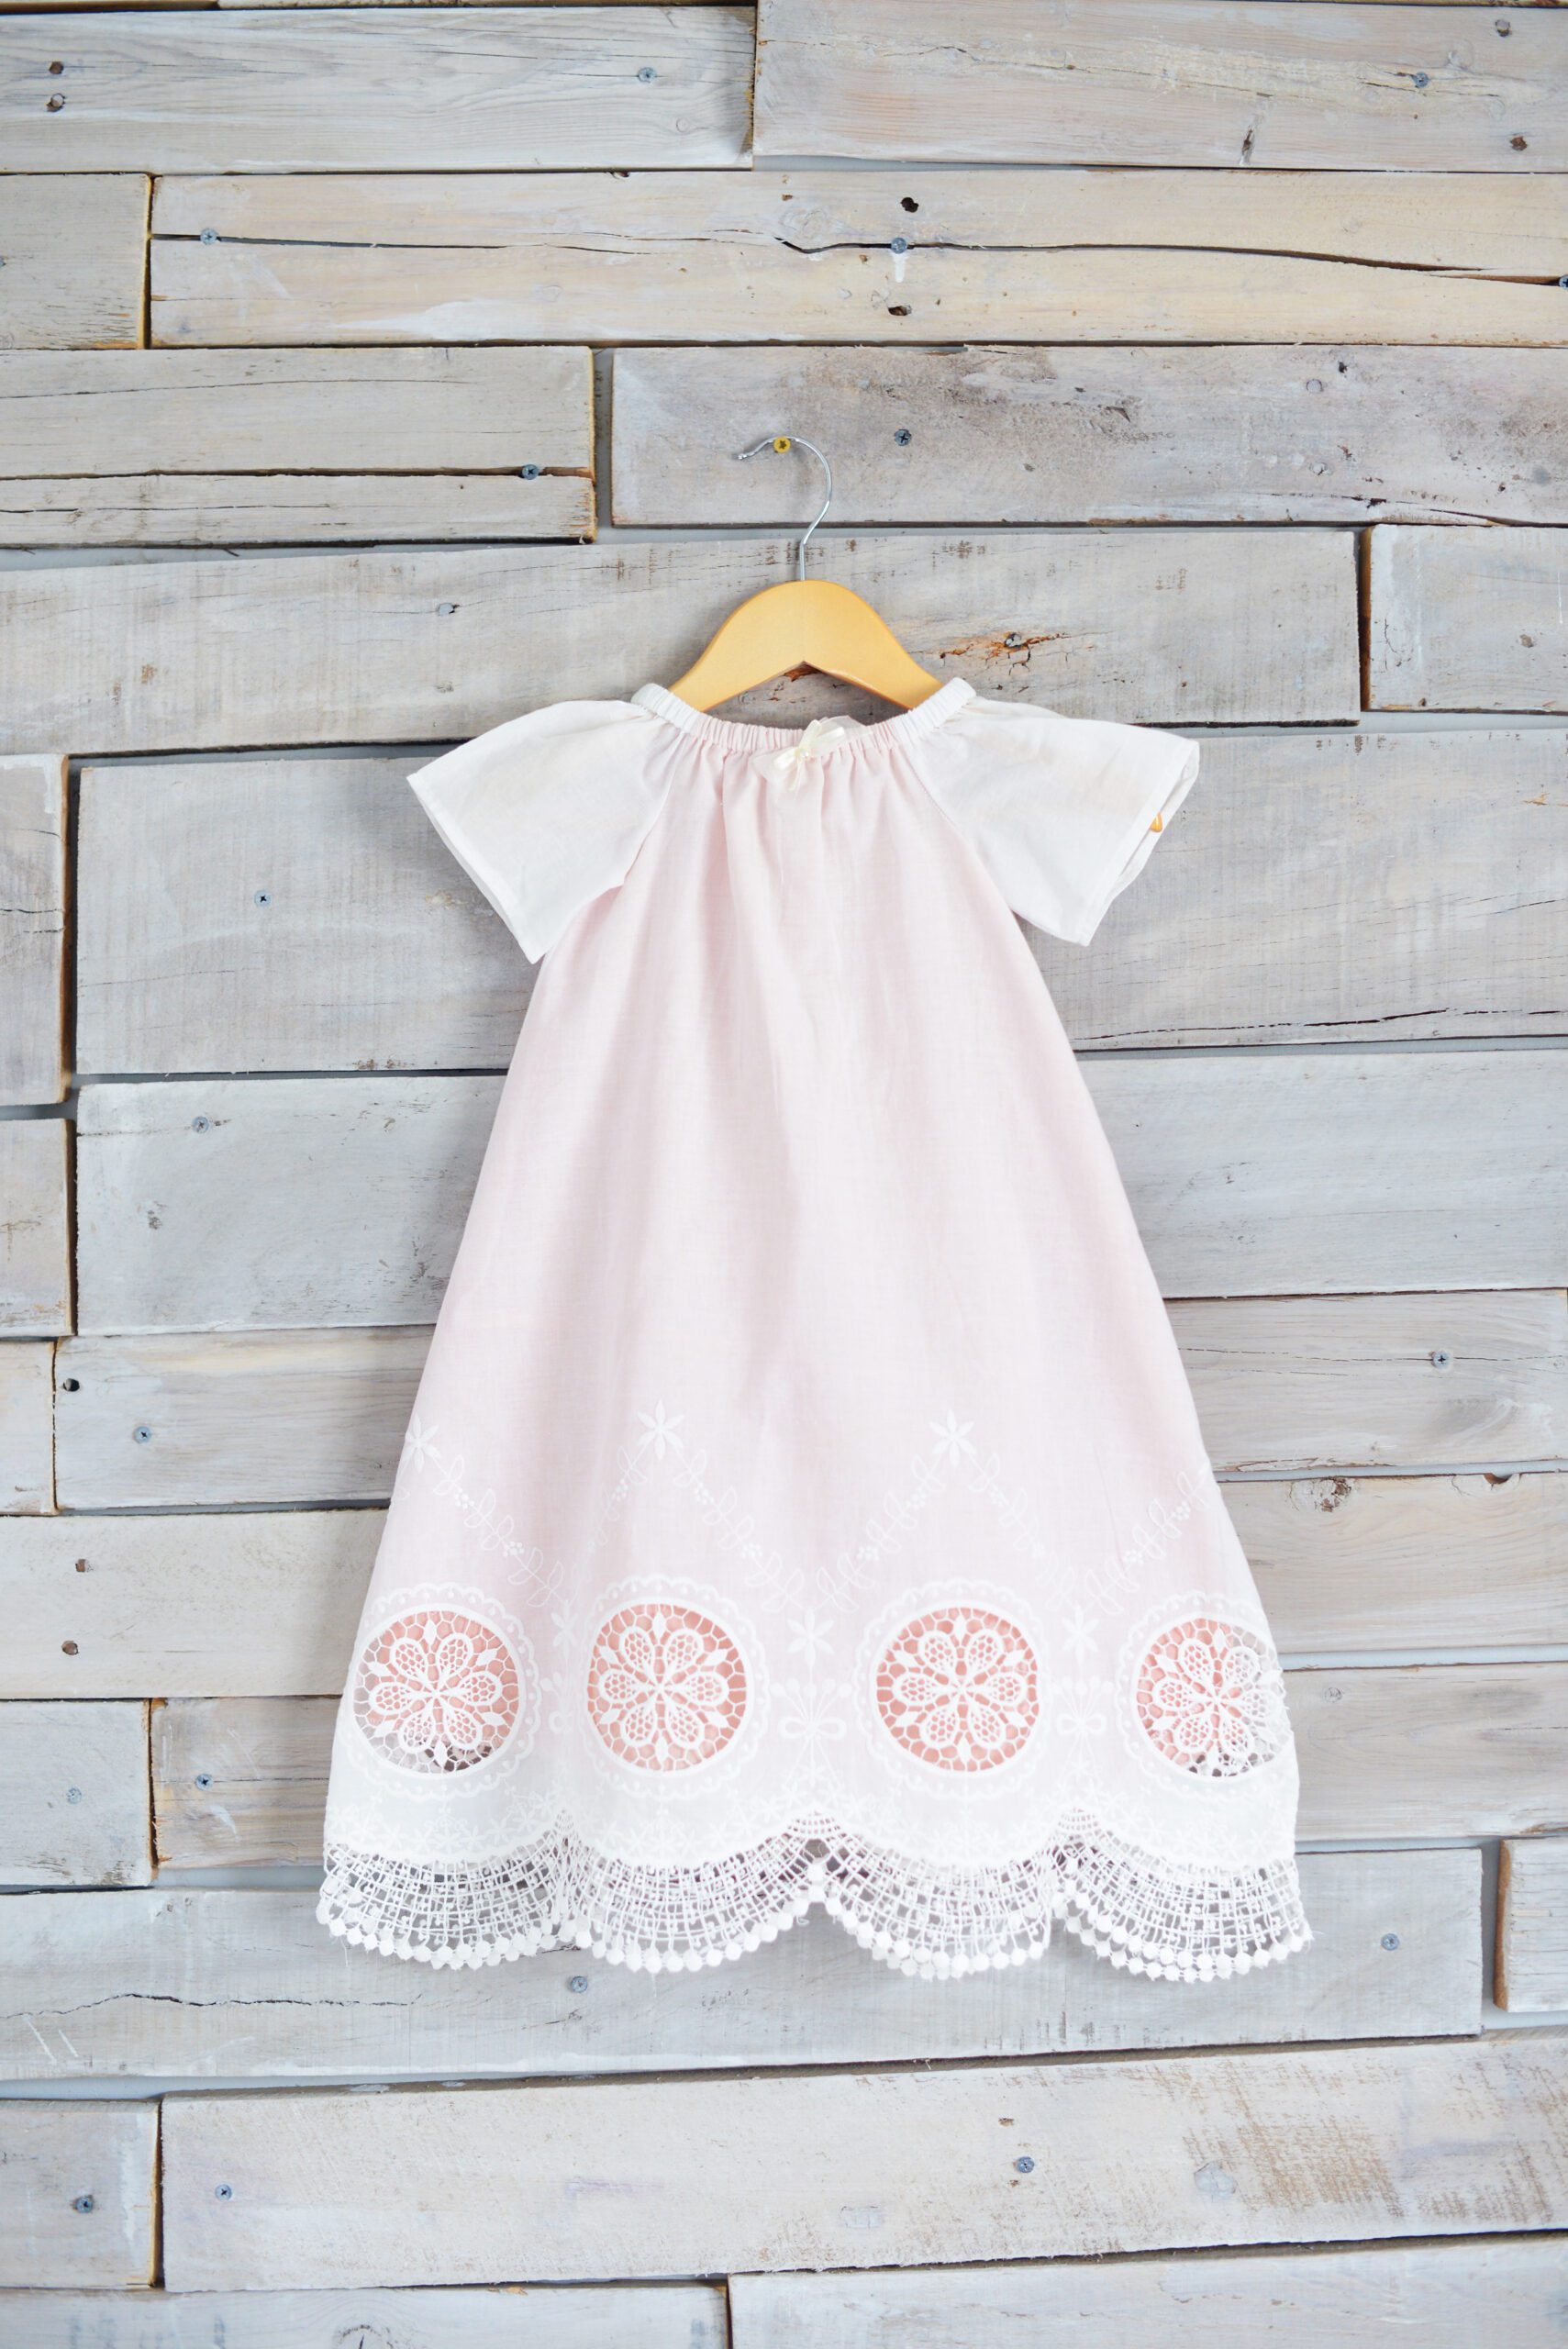 A photo of a white lace christening gown with a pink underlay